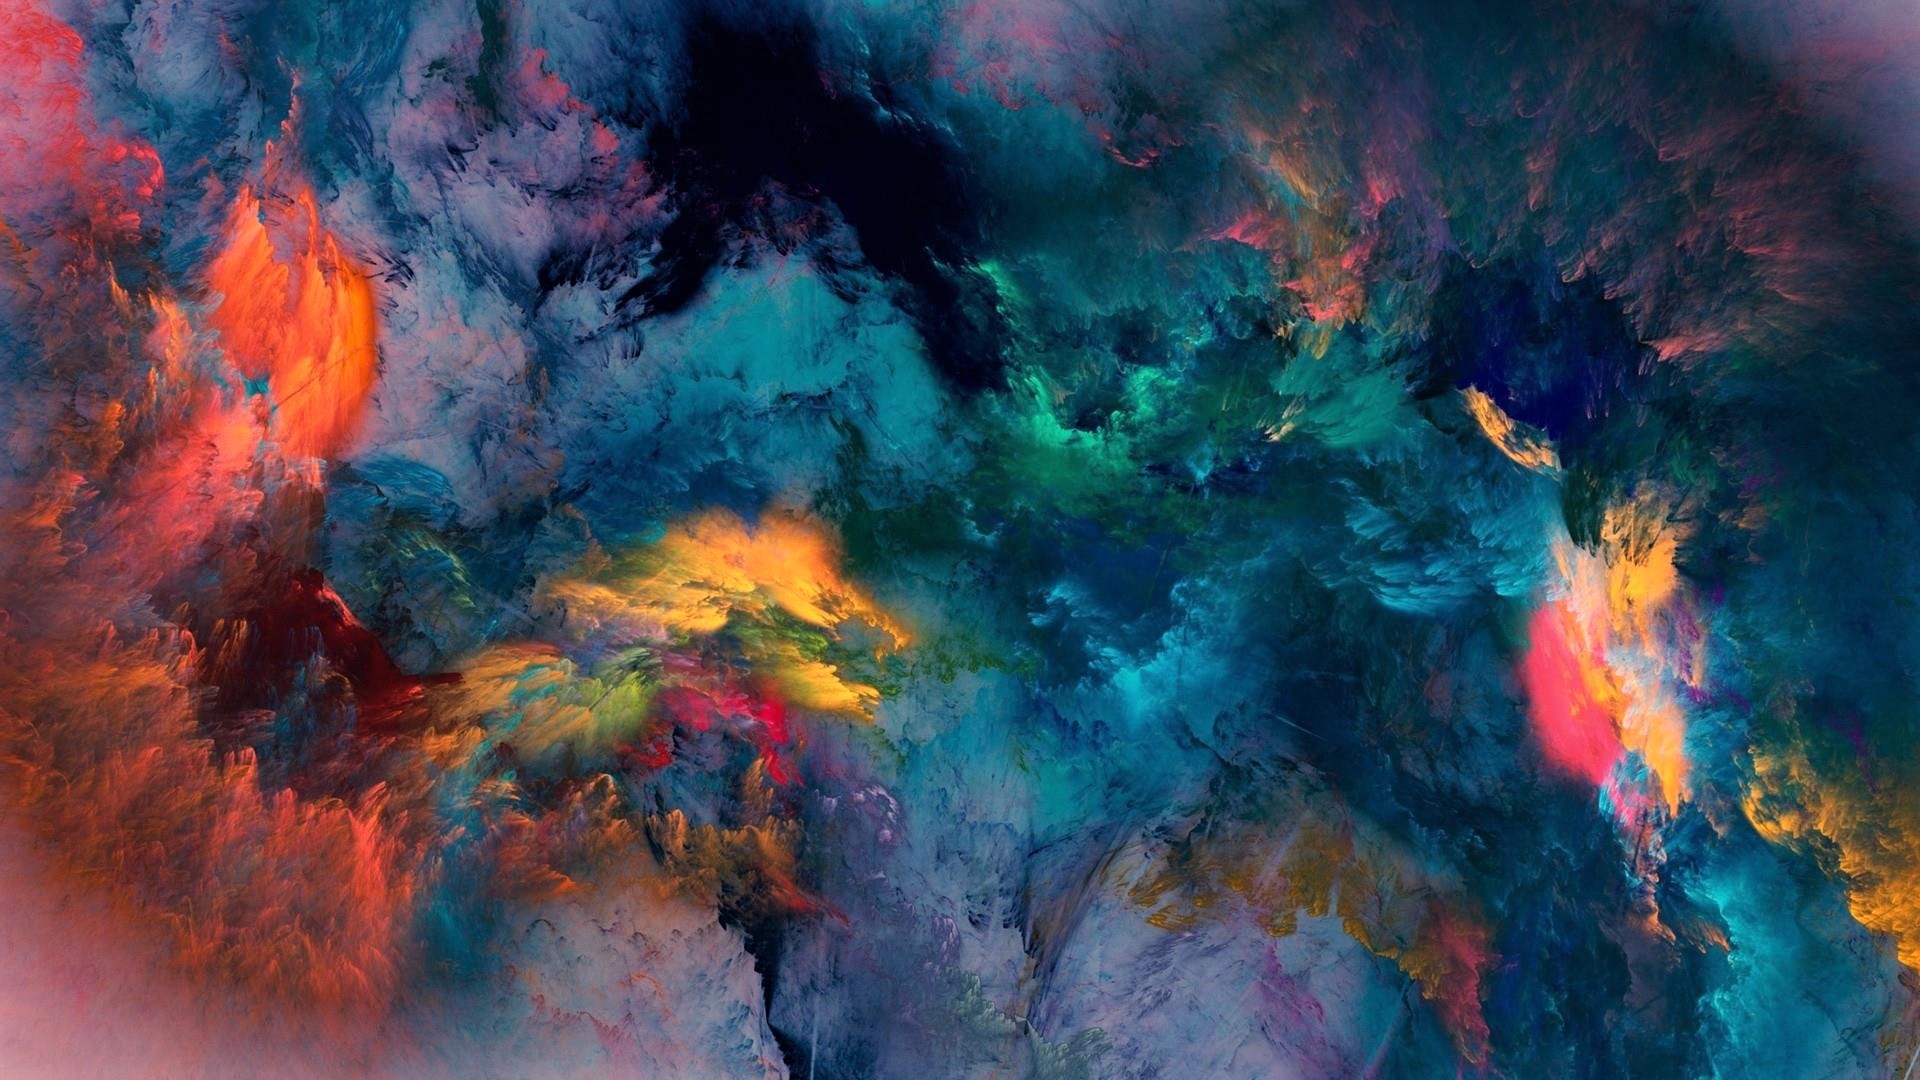 Abstract Colors Hd Wallpaper Background Image 1920x1080